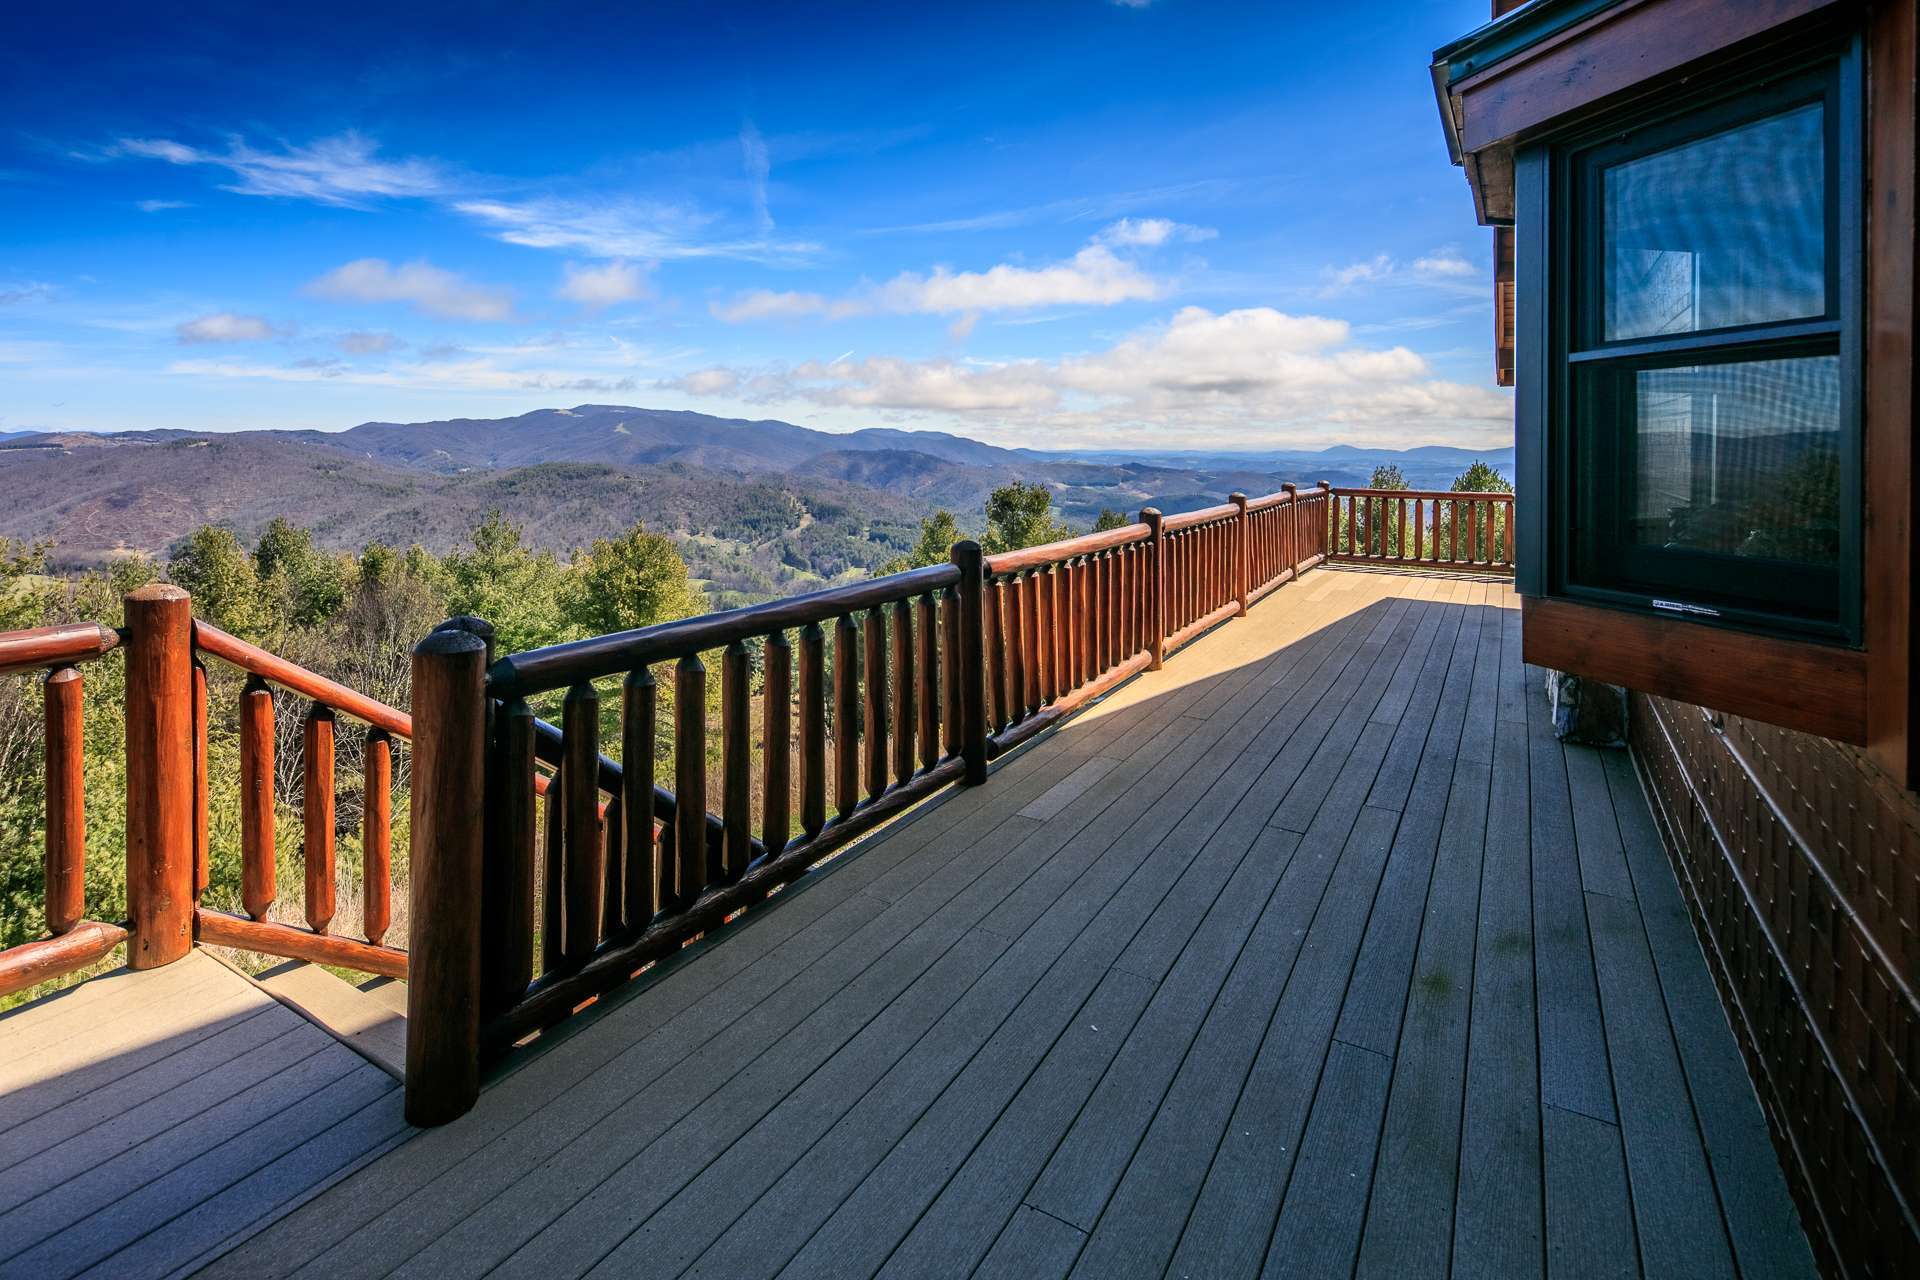 Enjoy total privacy and Nature's wonder while at  this  Kindrick  Mountain retreat .